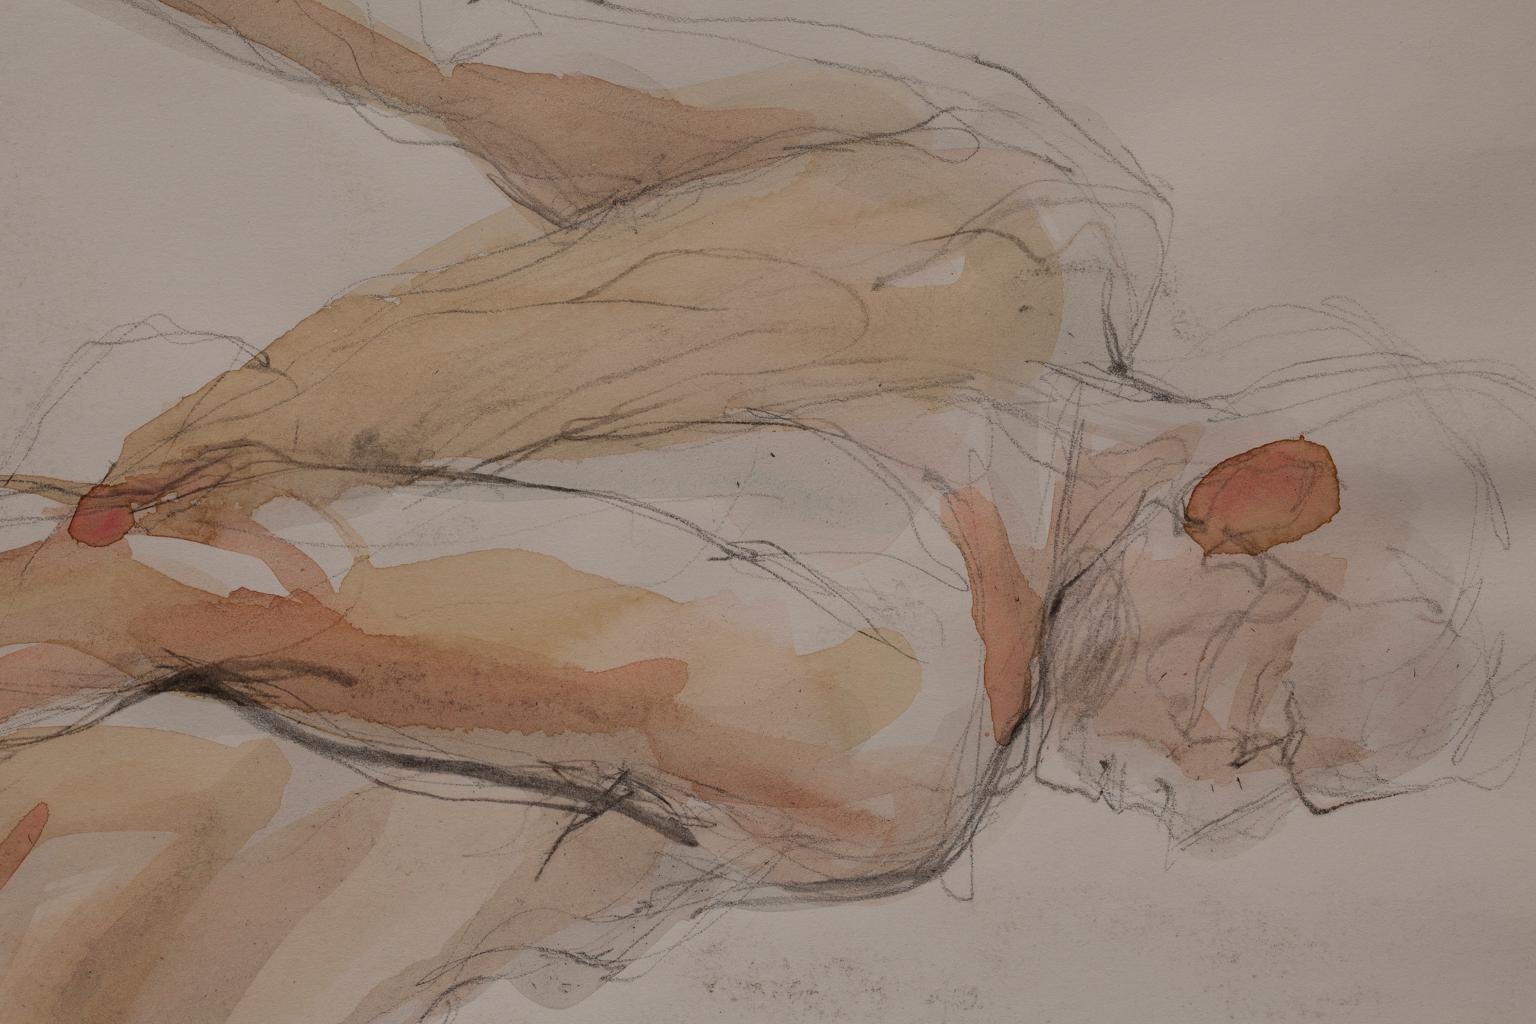 This watercolor and graphite on paper from the seminal artist Artis Lane is one of the many model paintings from her long and illustrious career. The subject is two nude males, one in pose and one in movement. Artis Lane, in her many nudes, chose to